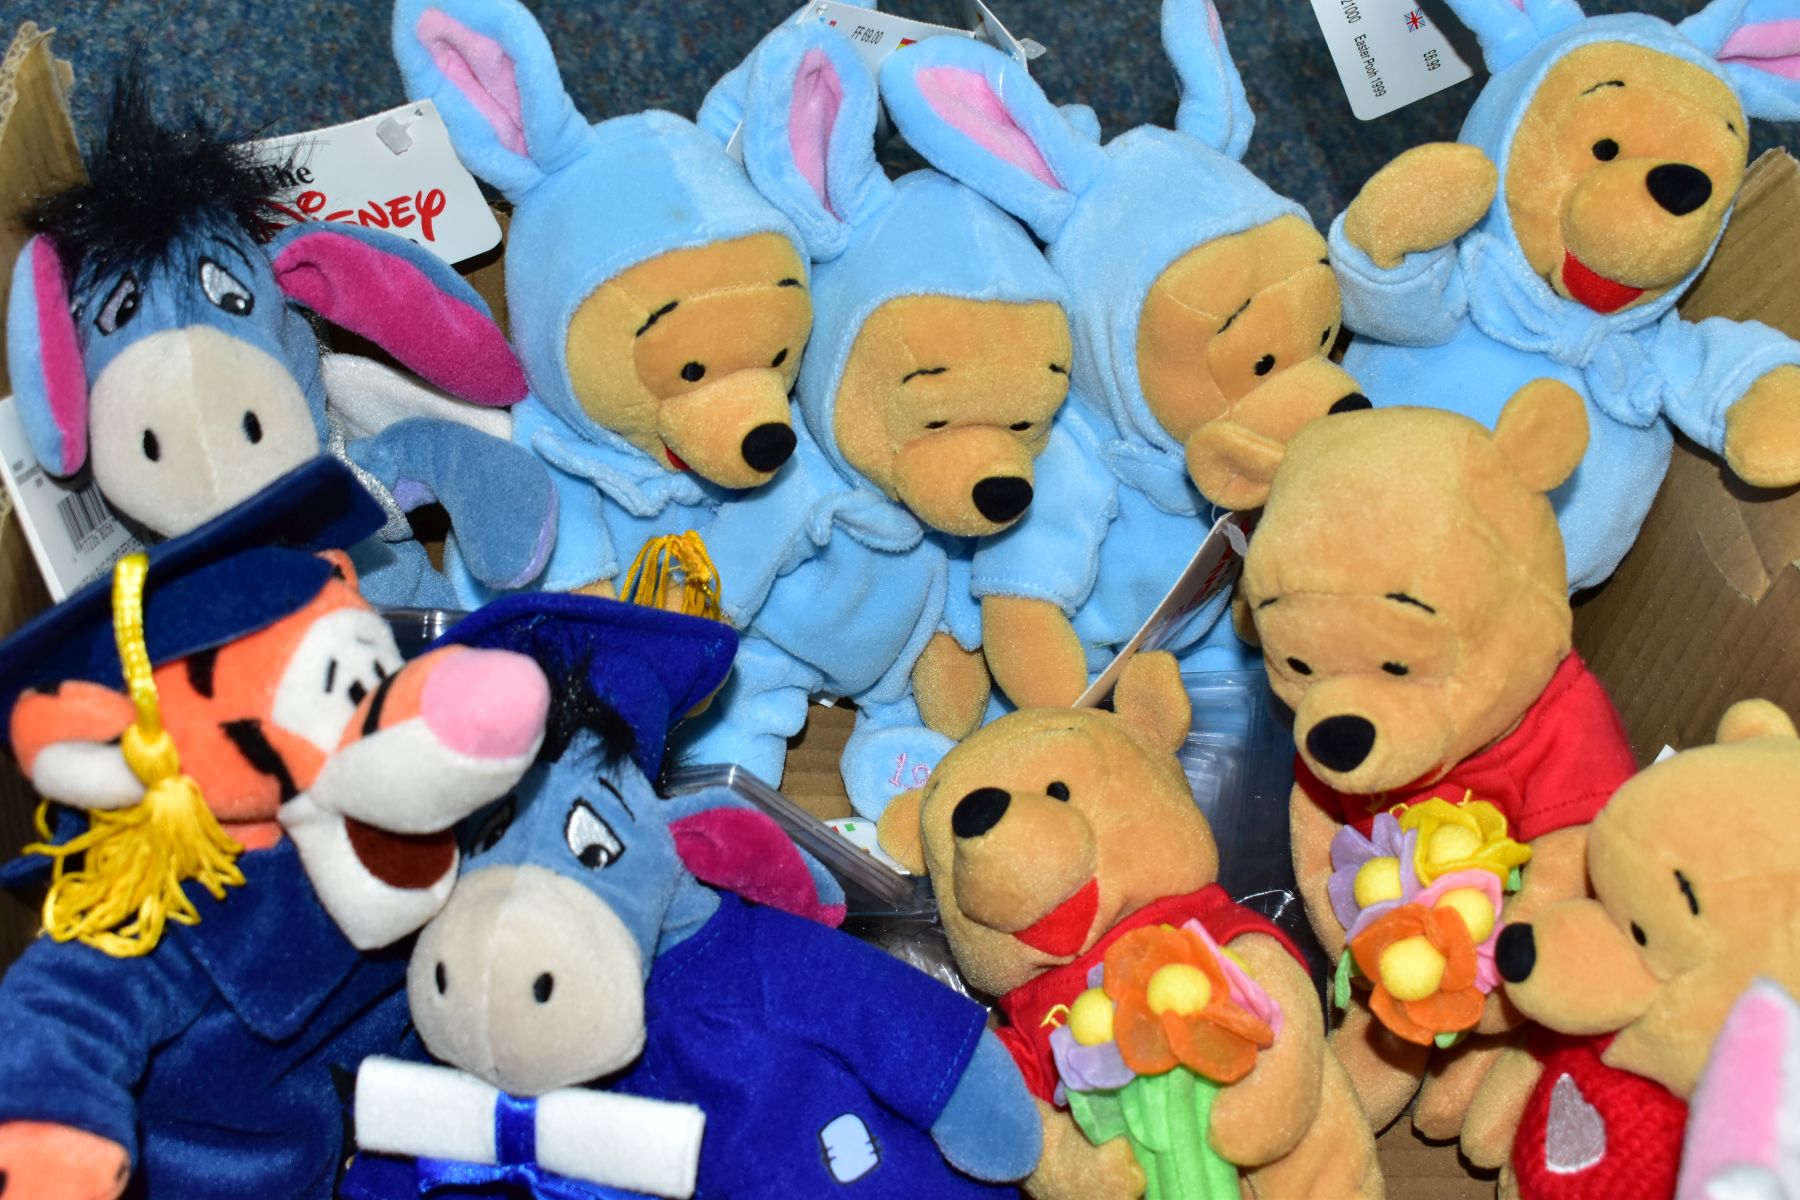 A BOX OF DISNEY BEANIE SOFT TOYS, most still with tags, characters include Winnie The Pooh, - Image 3 of 3